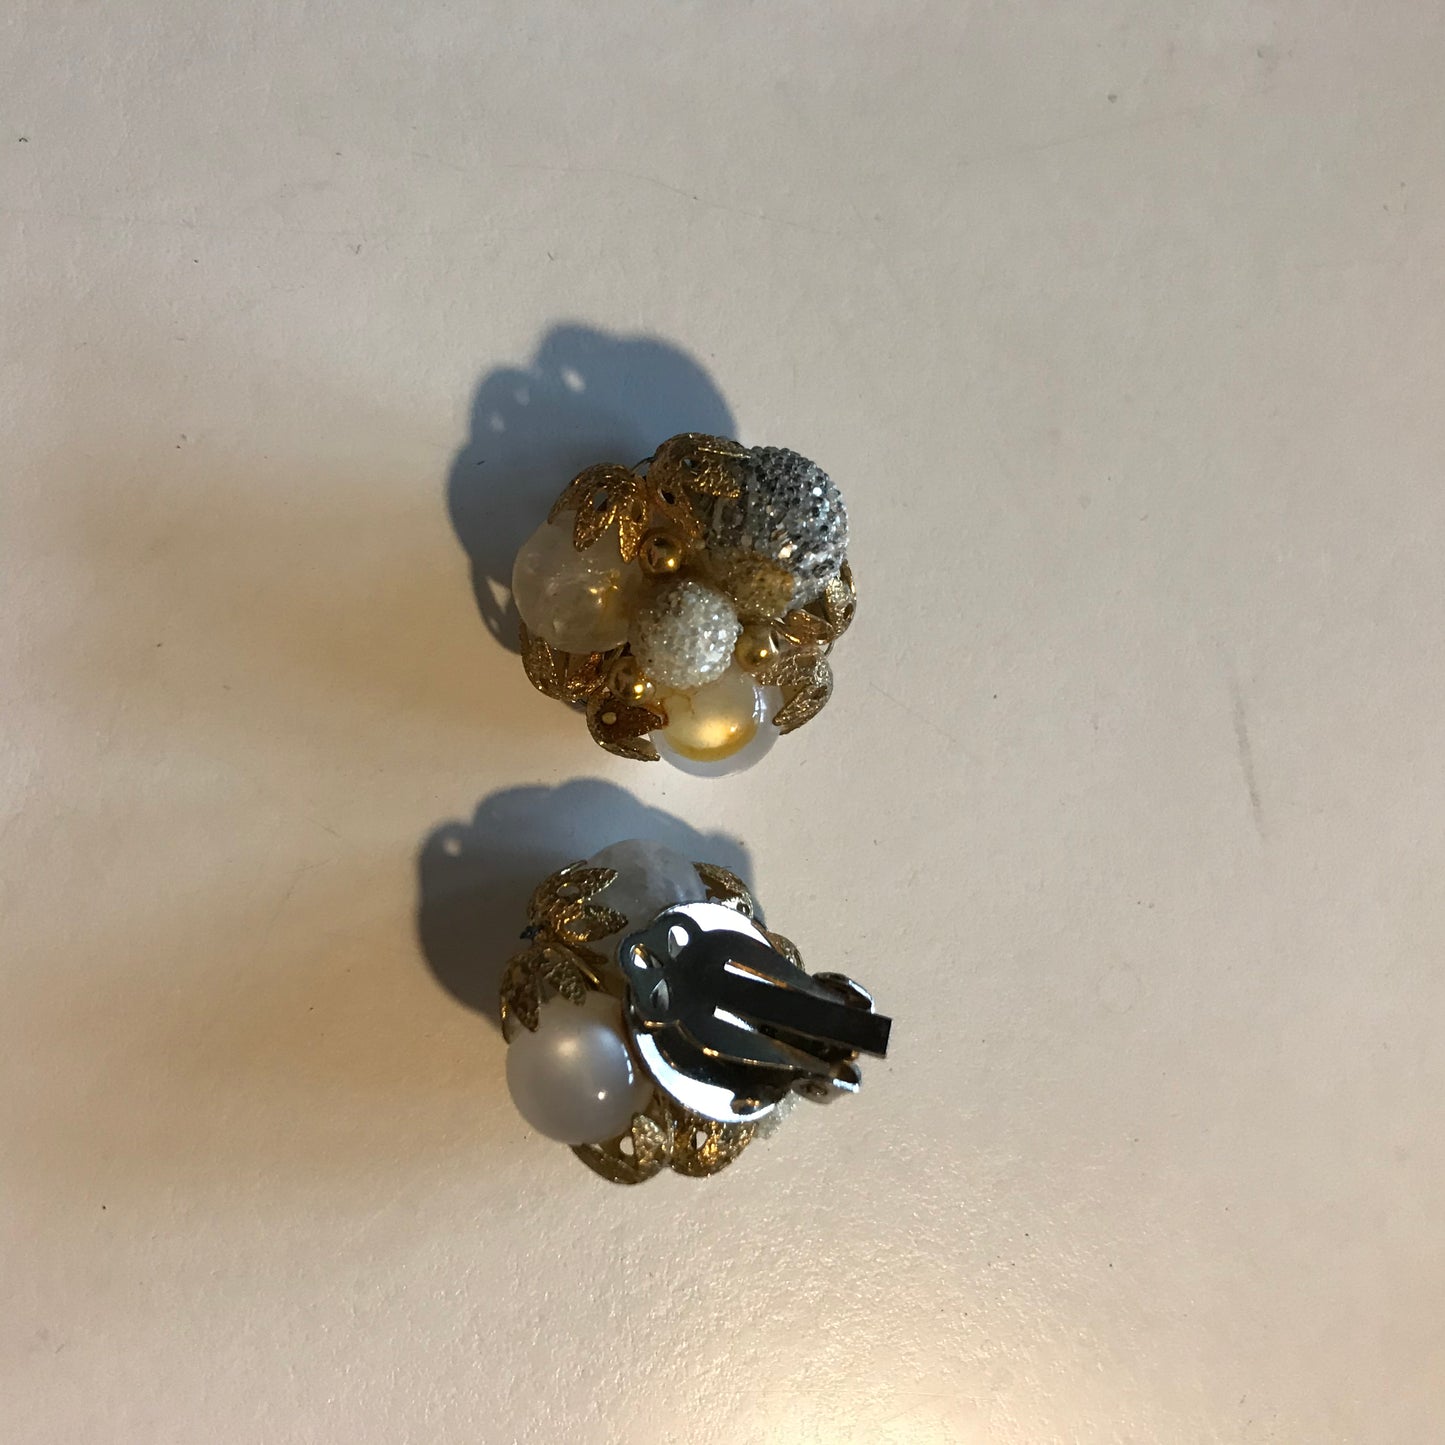 Shimmering Champagne and White Bead Cluster Clip Earrings circa 1960s